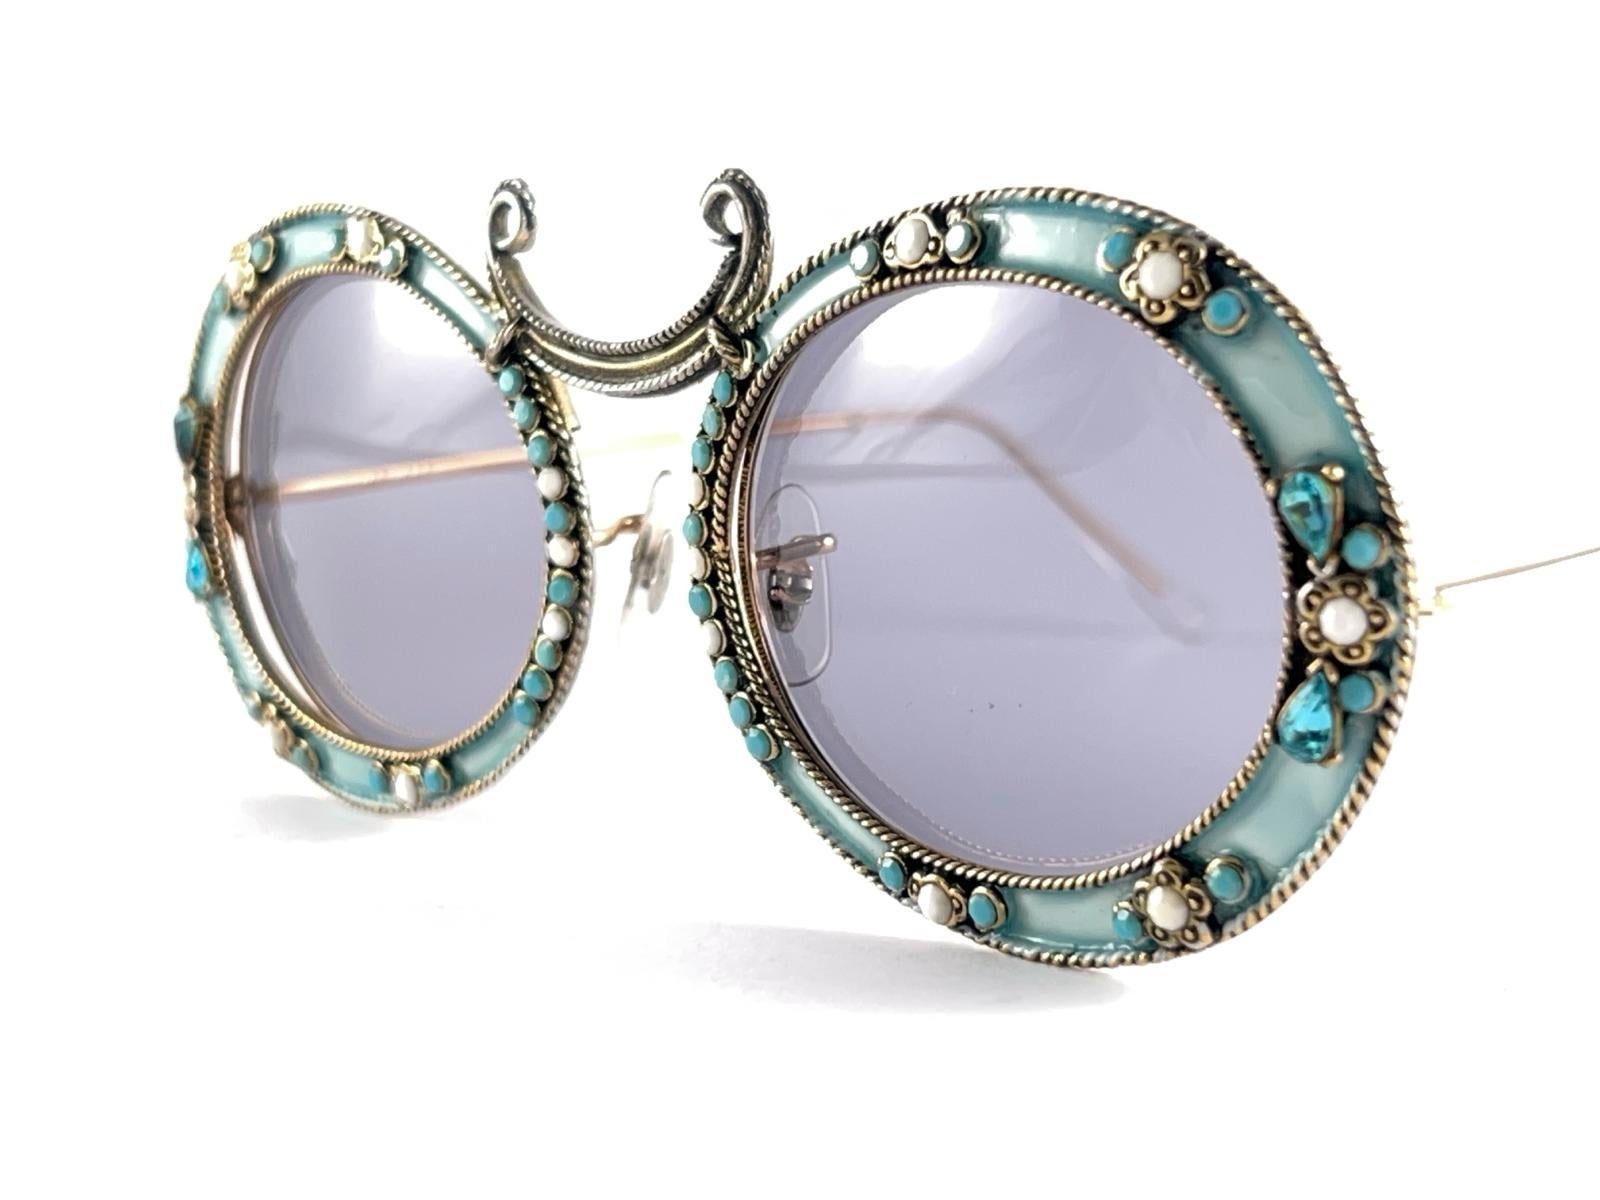 Ultra Rare 1960 Christian Dior Enamel Jewelled by Tura Collector Item Sunglasses For Sale 5